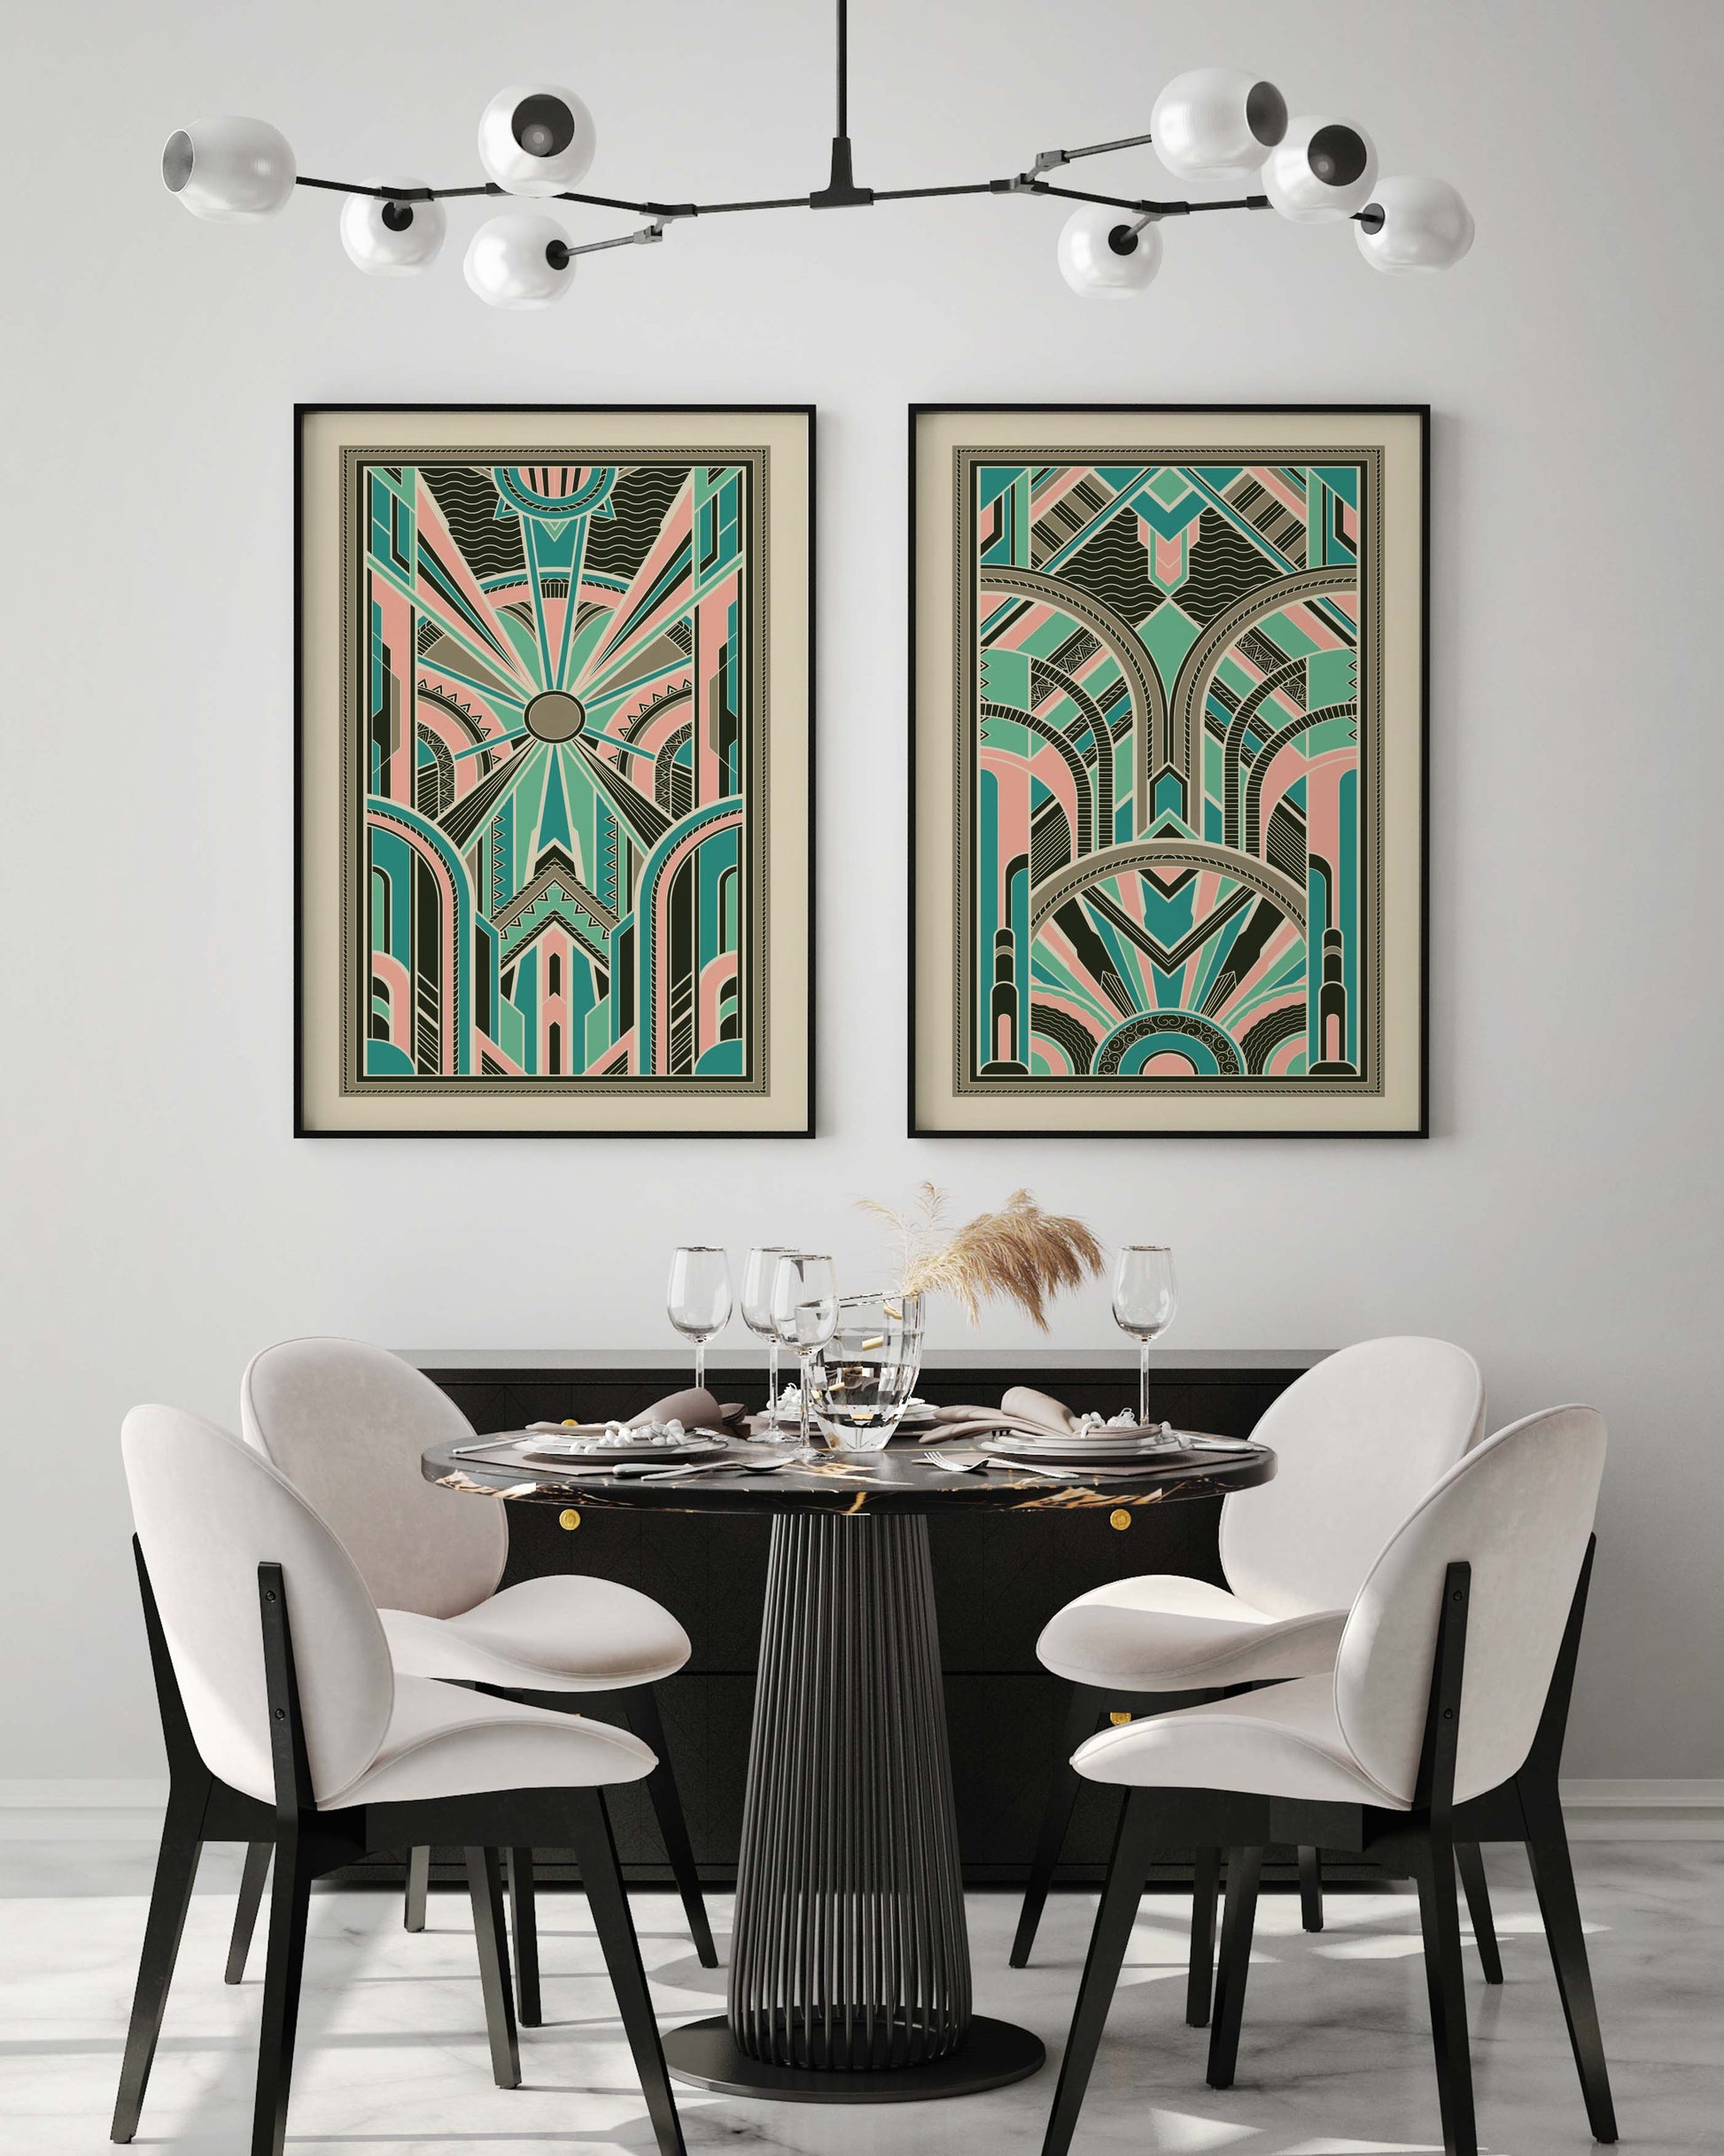 Set of 2 art deco prints in teal and pink